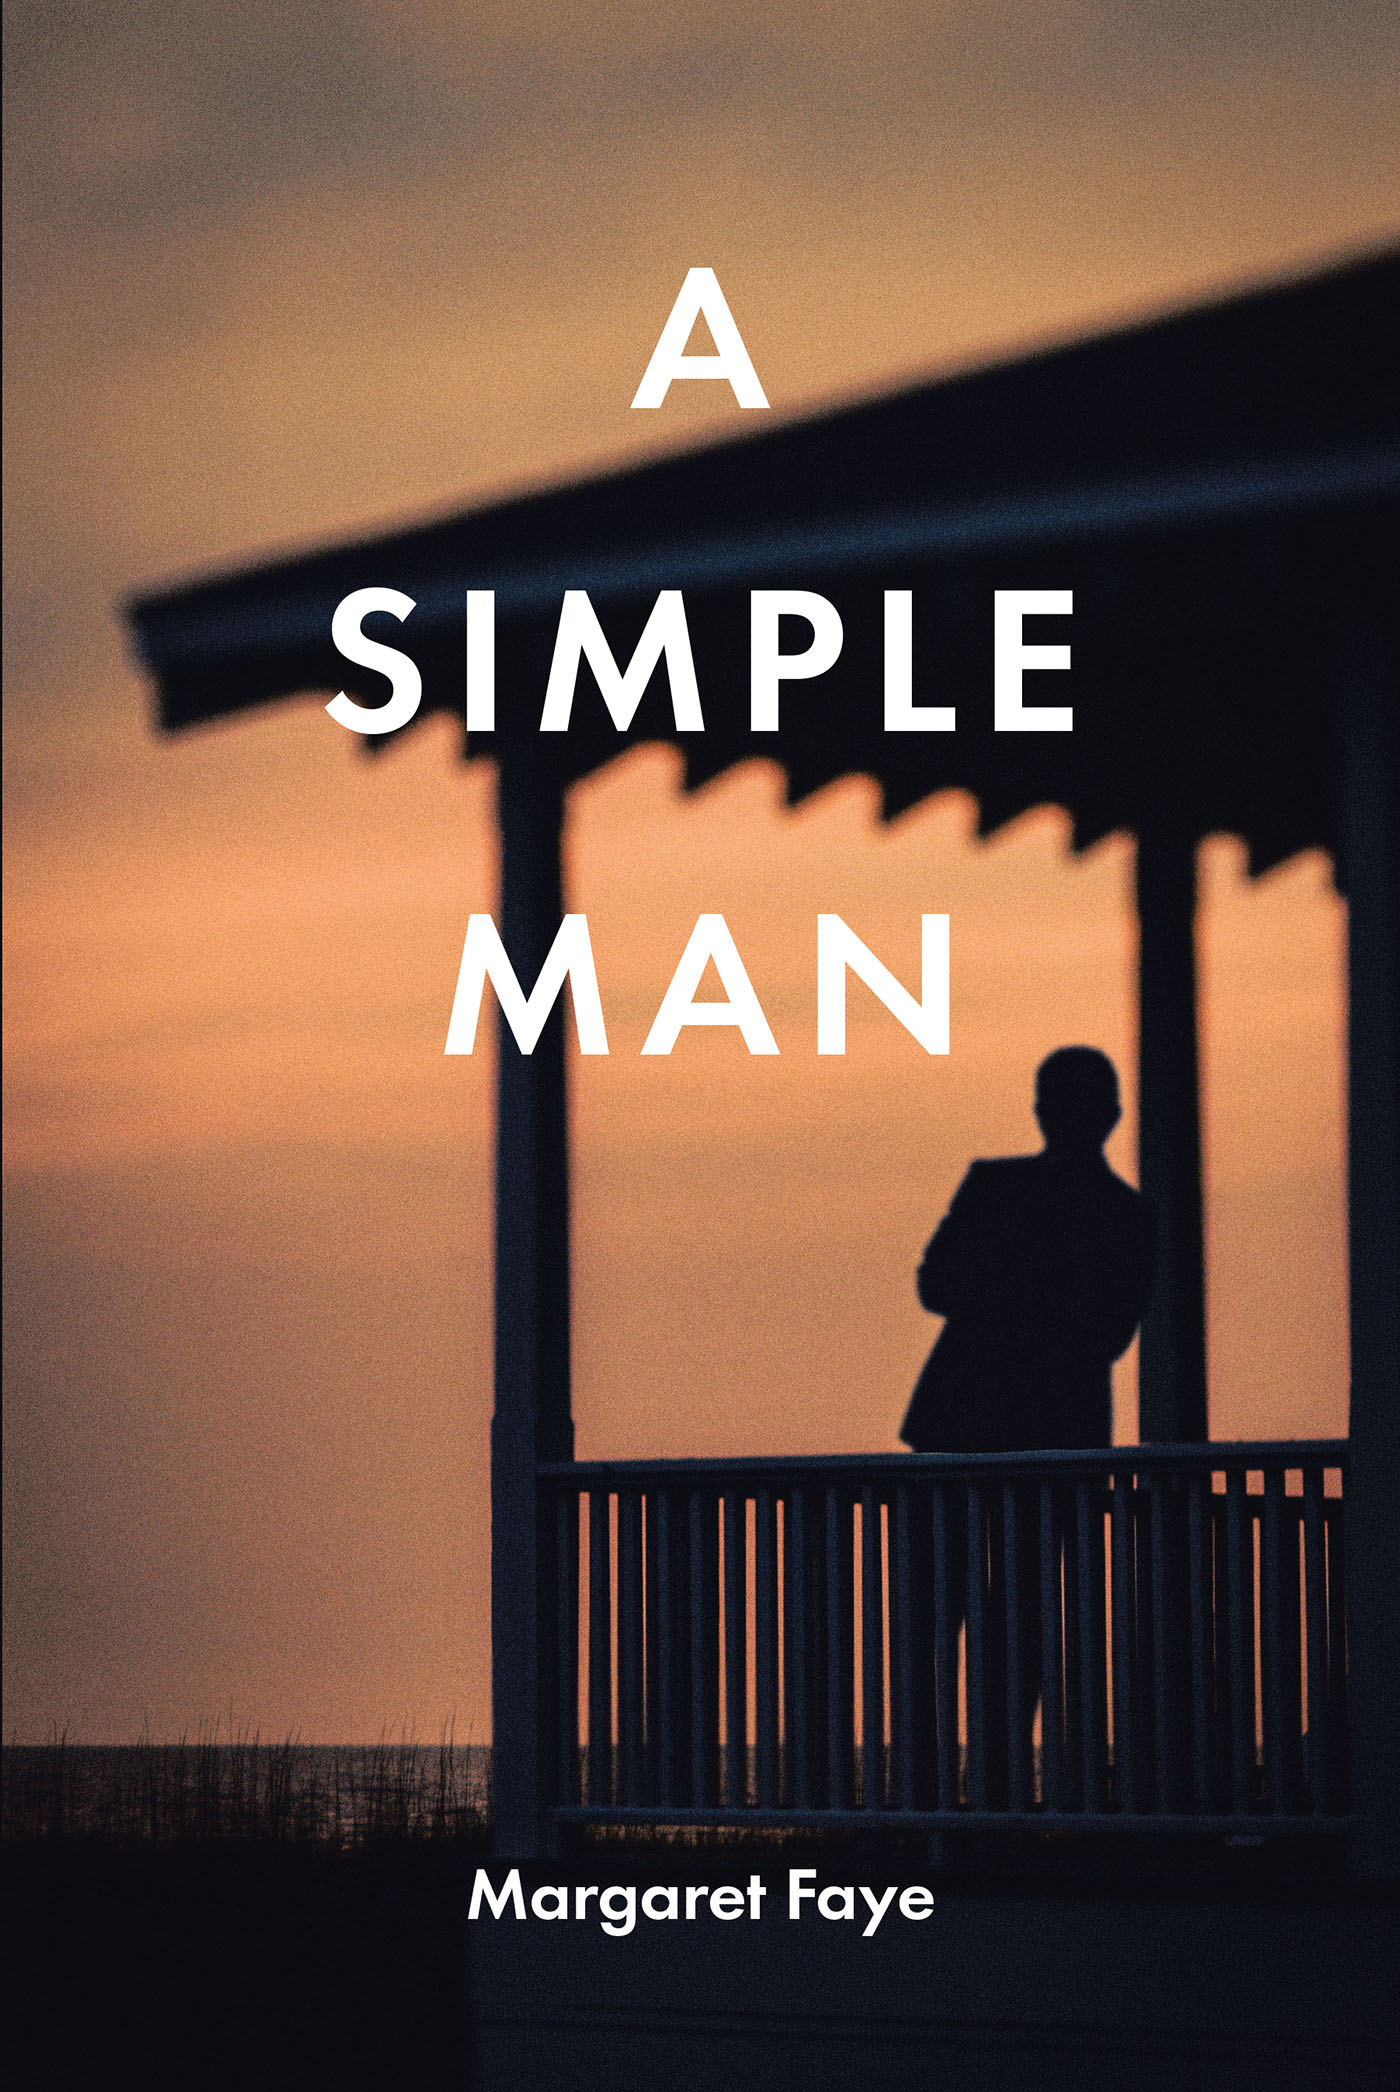 Margaret Faye’s Newly Released "A Simple Man" is a Touching Story of Connection Between a Loving Daughter and an Aging Father